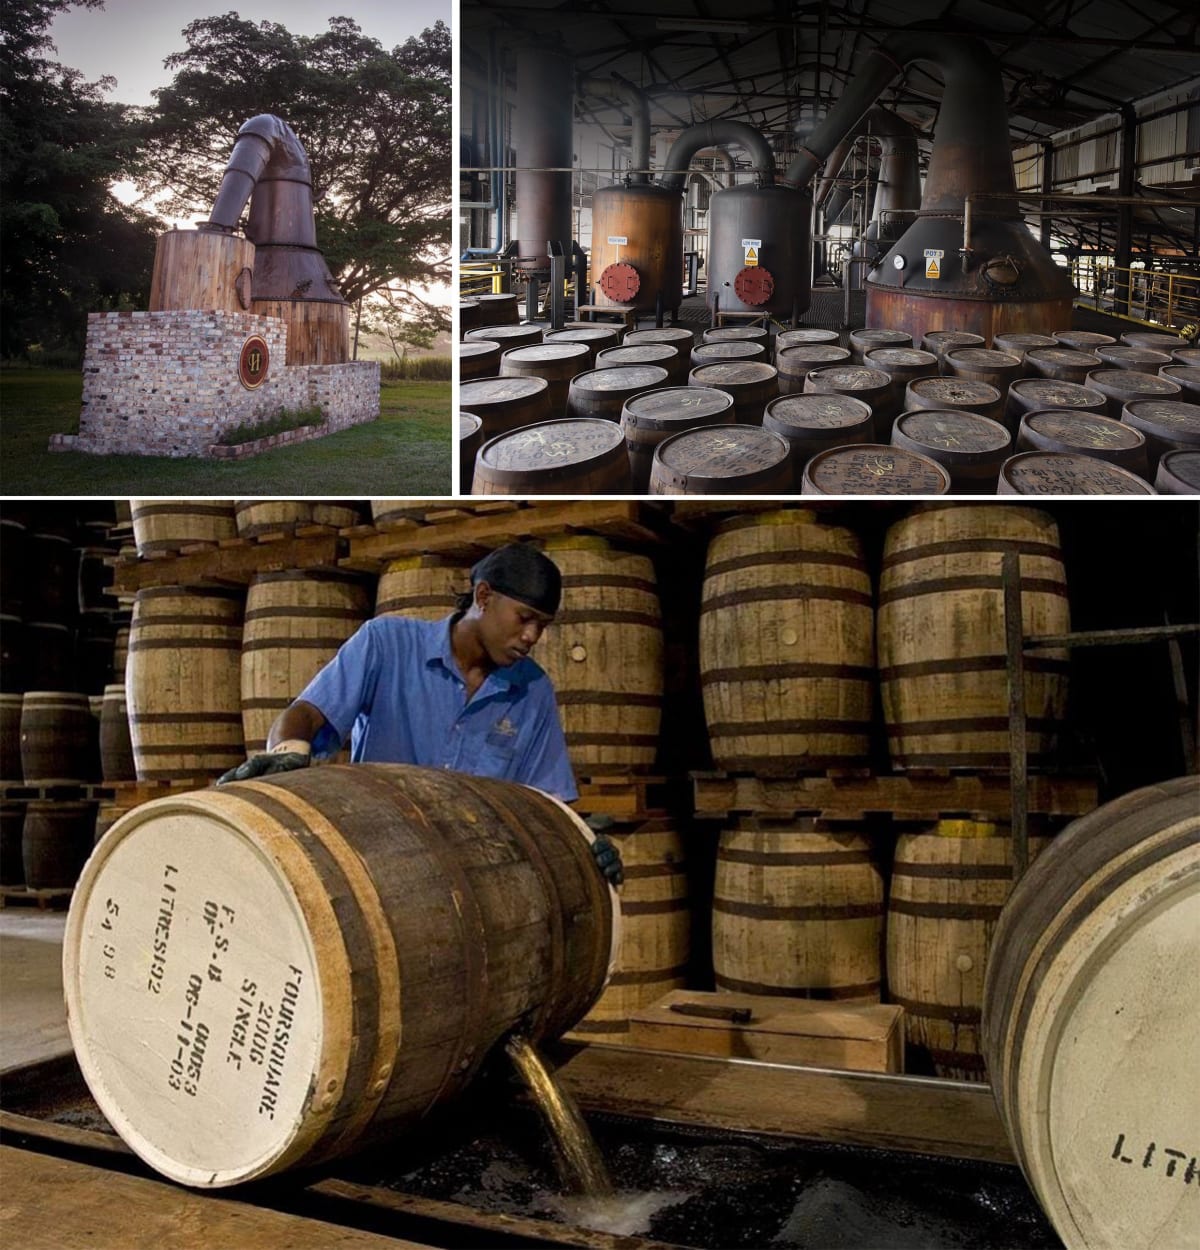 Rum's global boom: diverse flavours and styles to seek out